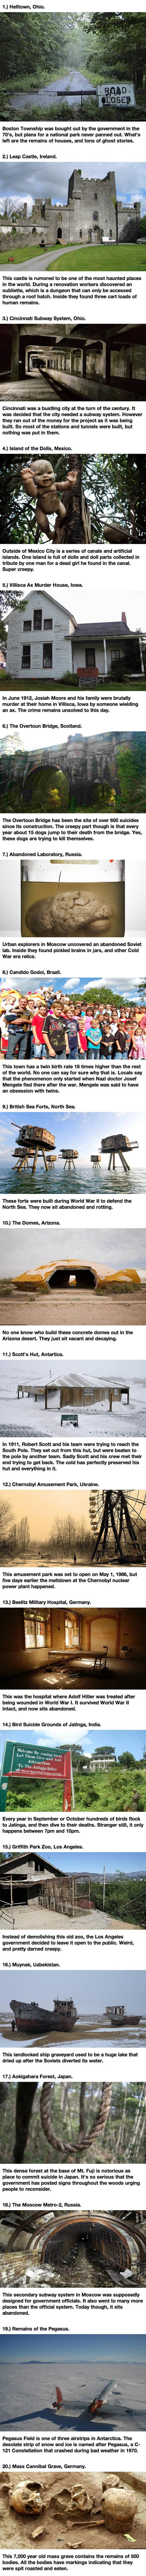 20 creepy places where nightmares are born